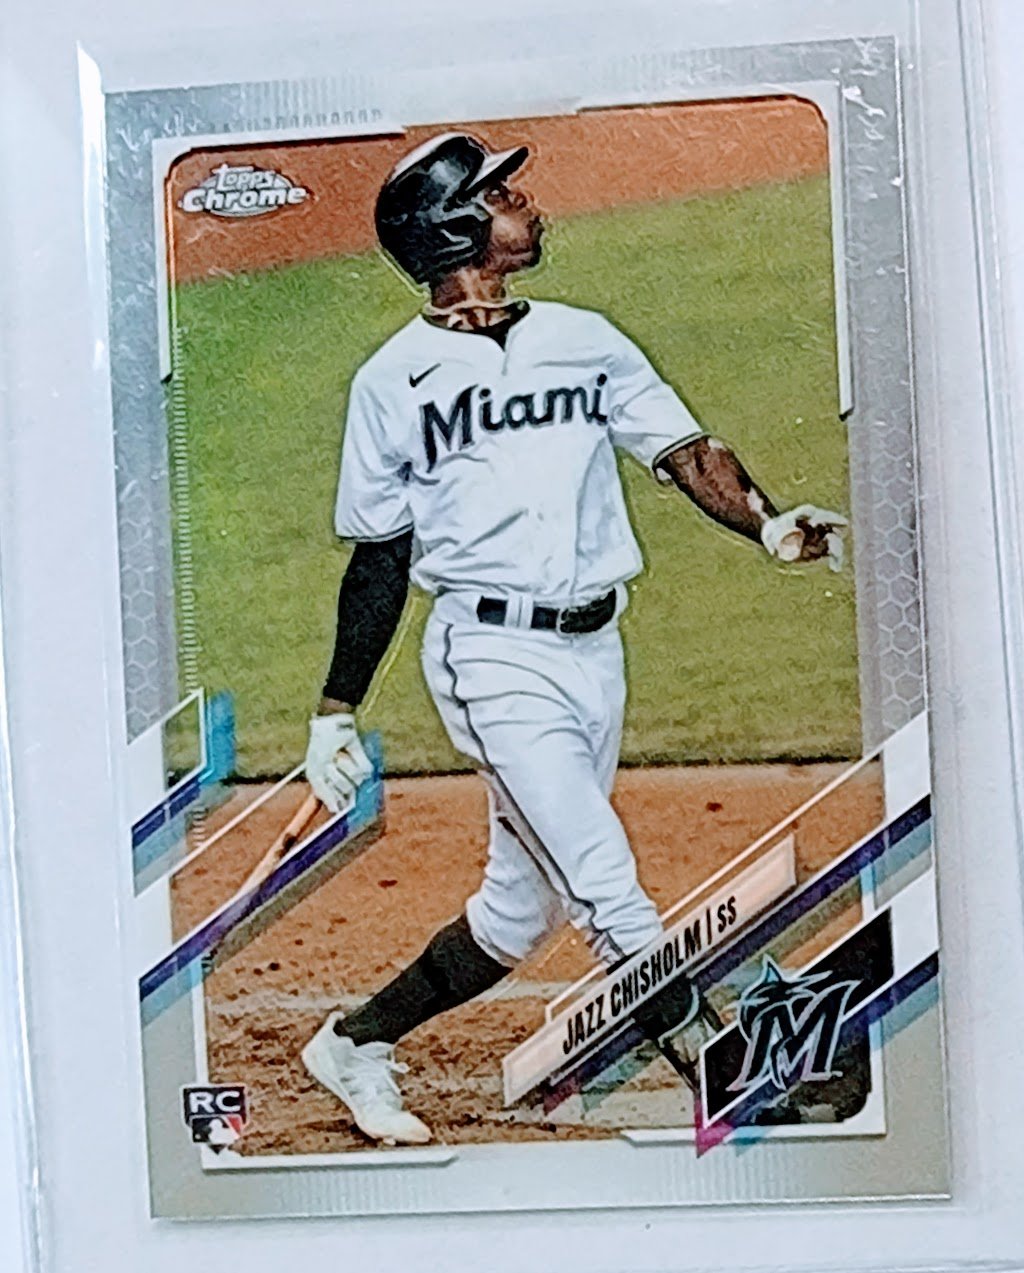 2021 Topps Chrome Jazz Chisolm Rookie Baseball Trading Card TPTV simple Xclusive Collectibles   